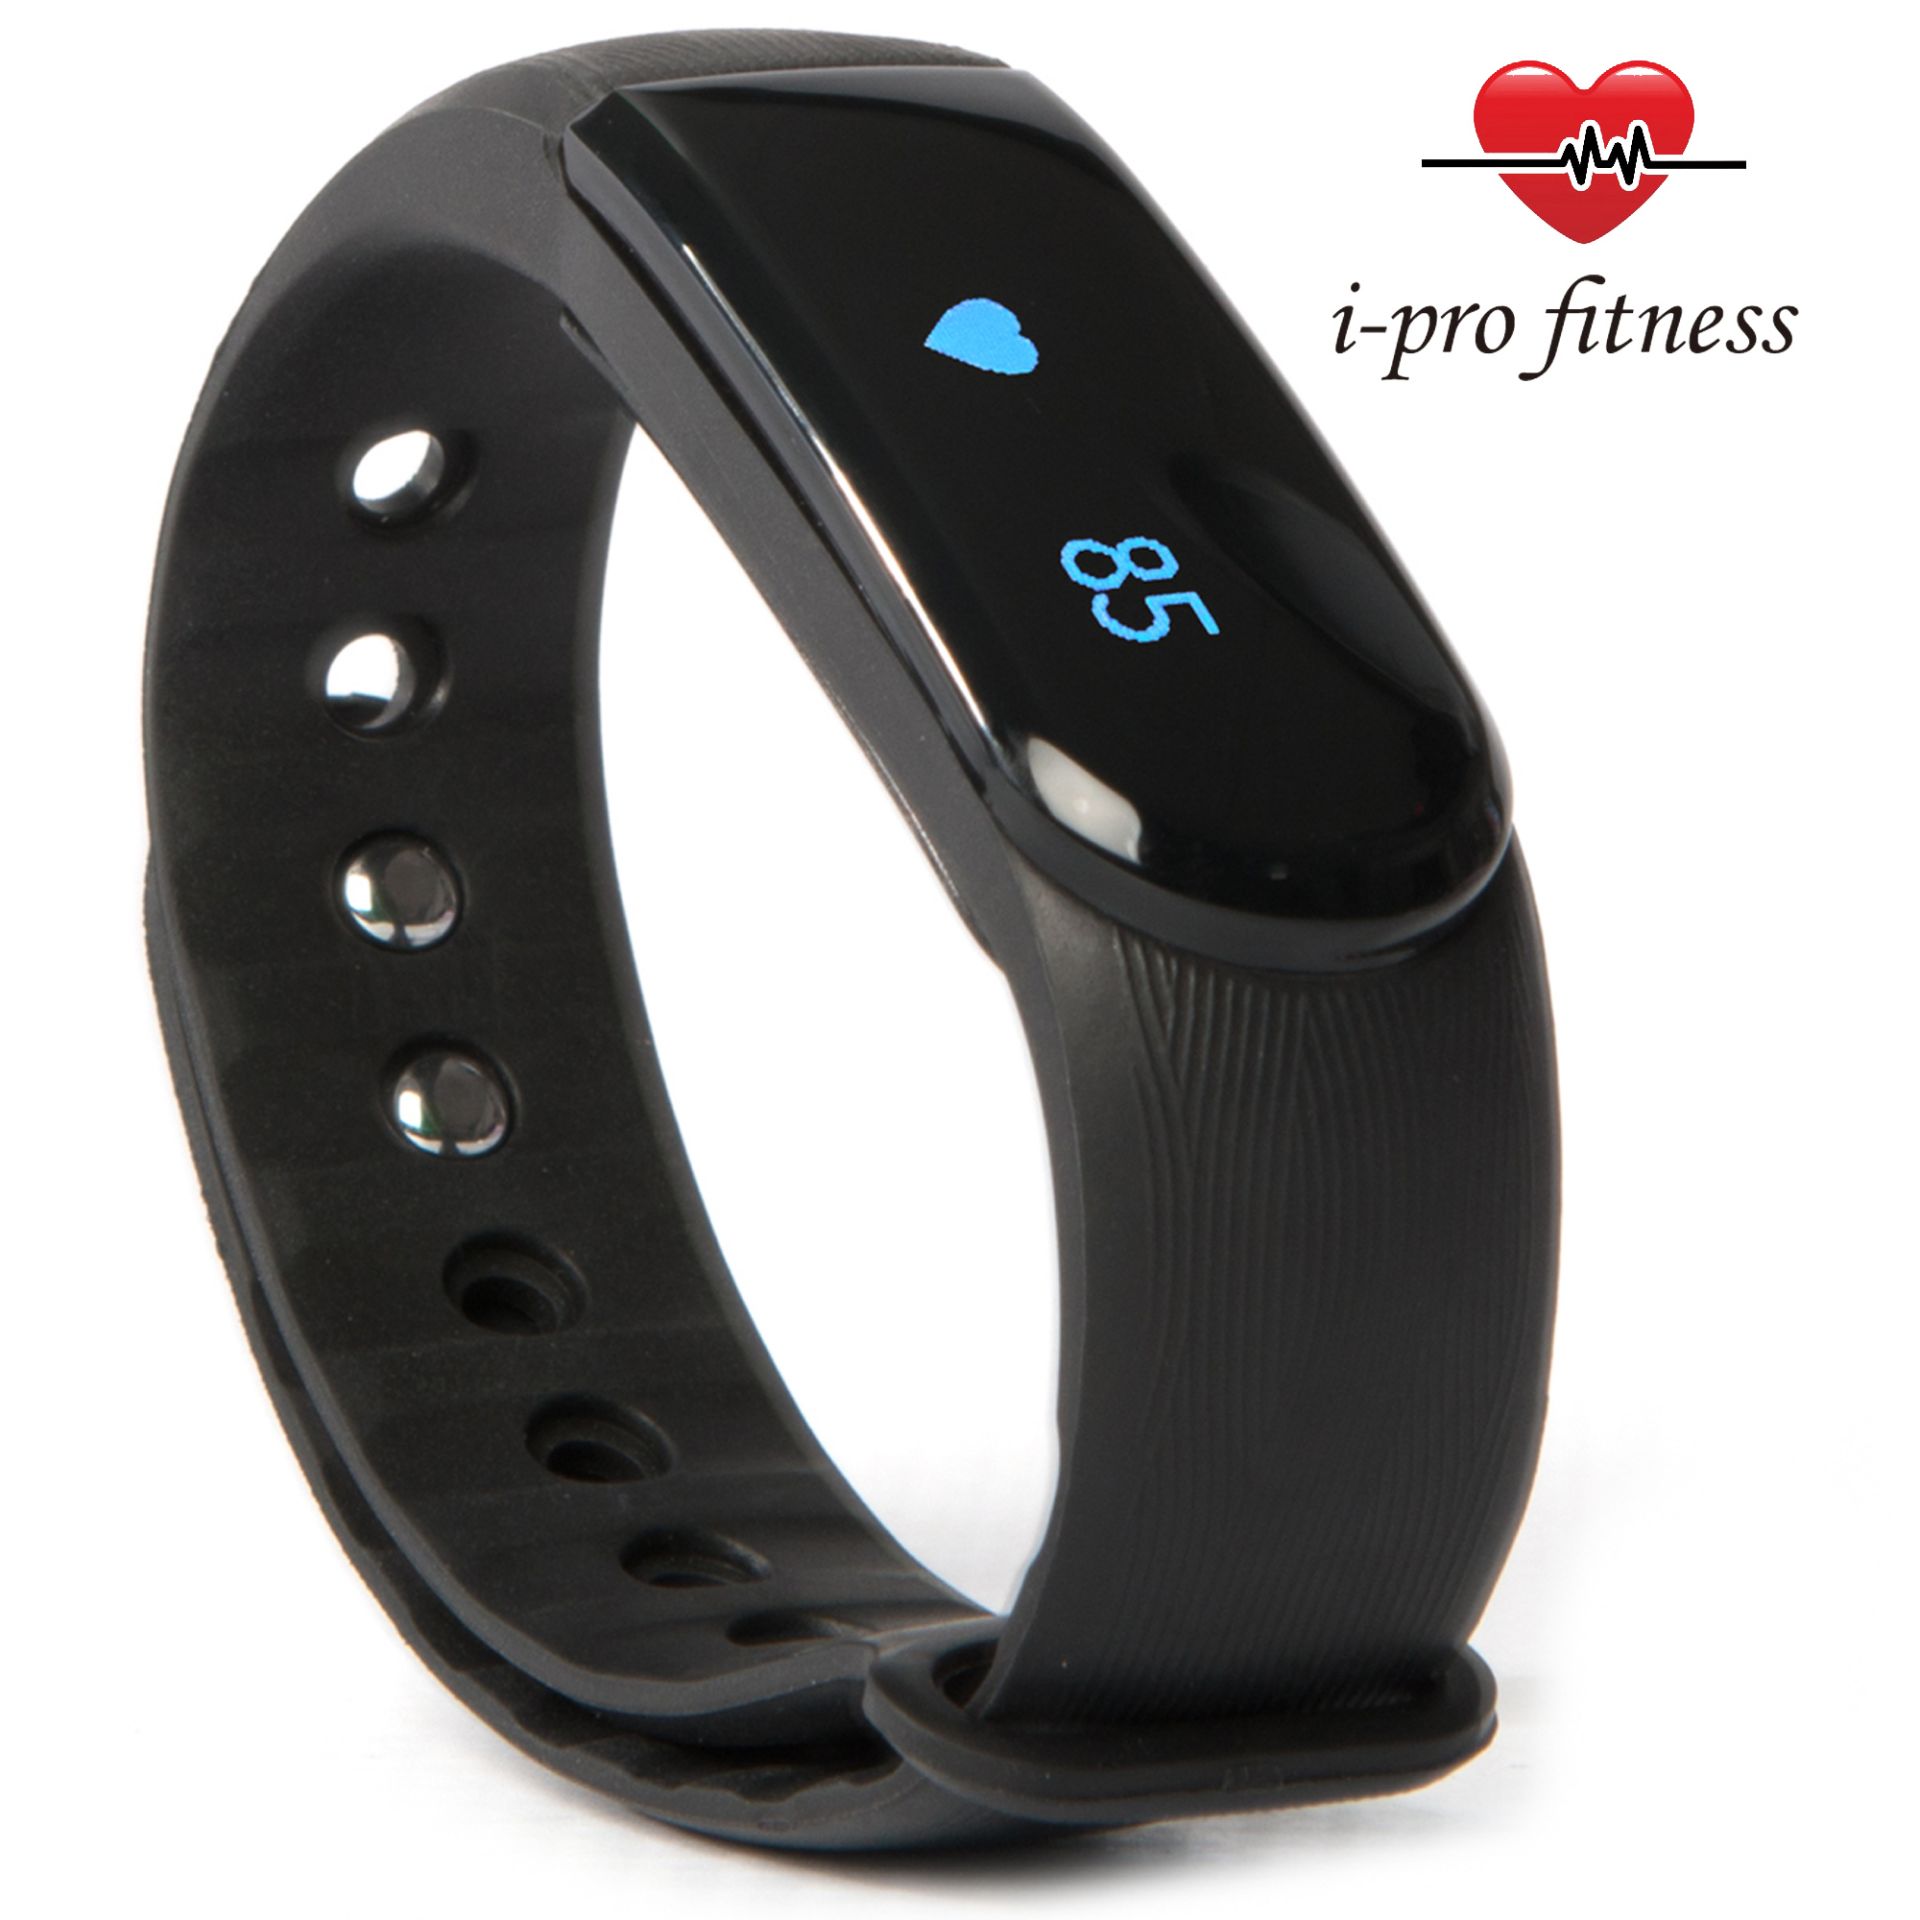 i-Pro ID101 Fitness Tracker Ð Seamless Pairing With VeryFit 2.0 App Ð Bluetooth Exercise Tracker - Image 5 of 5